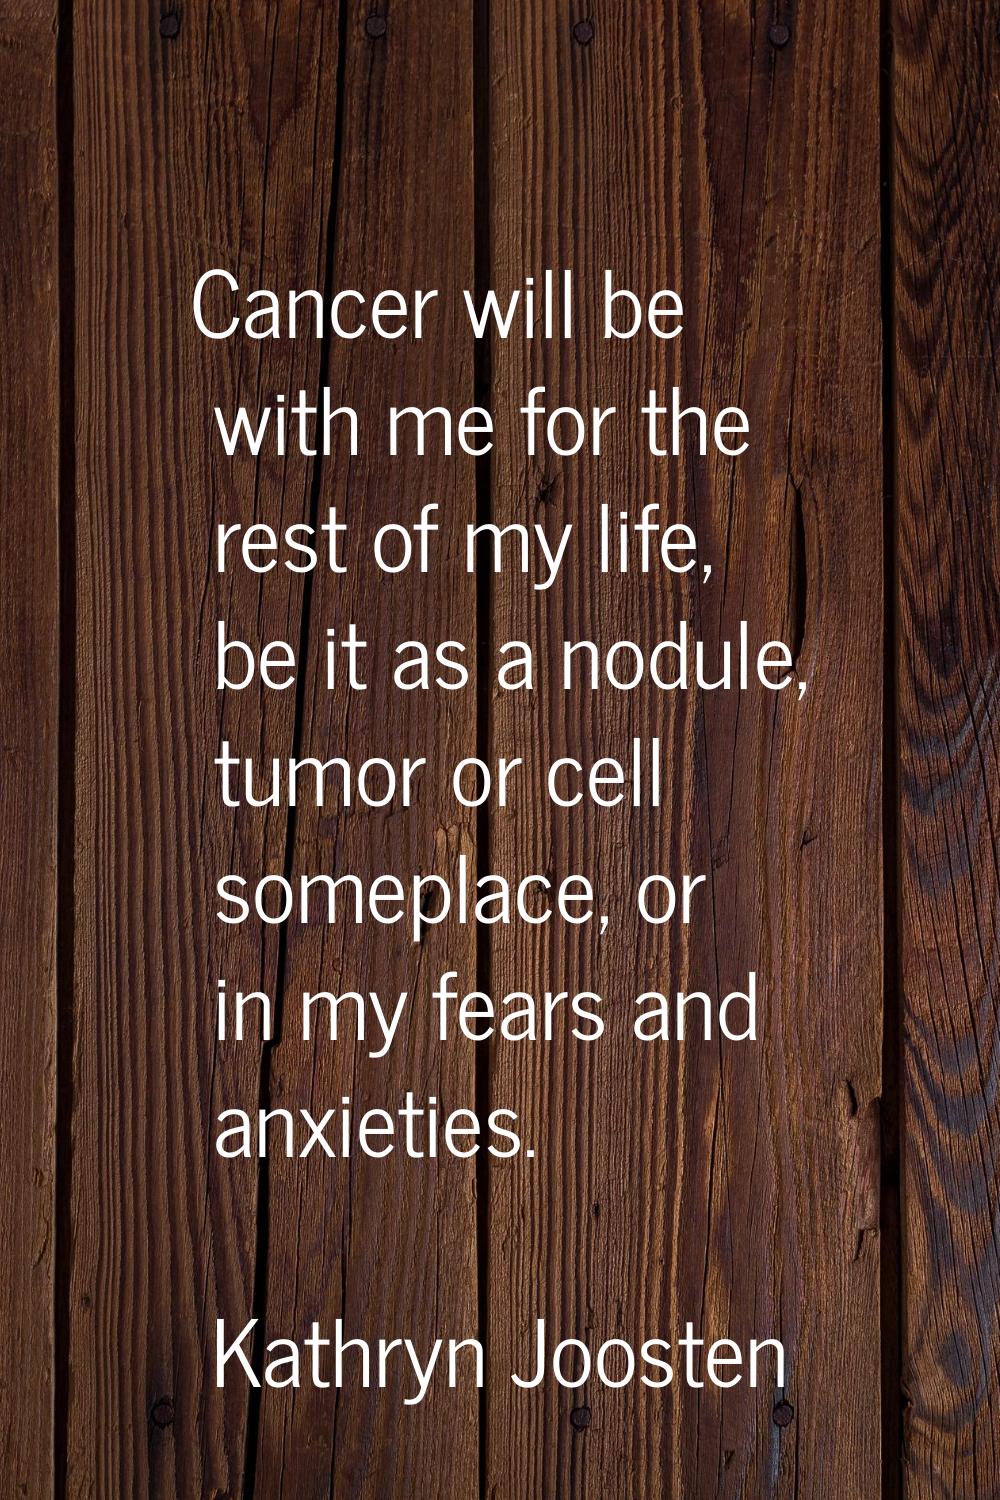 Cancer will be with me for the rest of my life, be it as a nodule, tumor or cell someplace, or in m